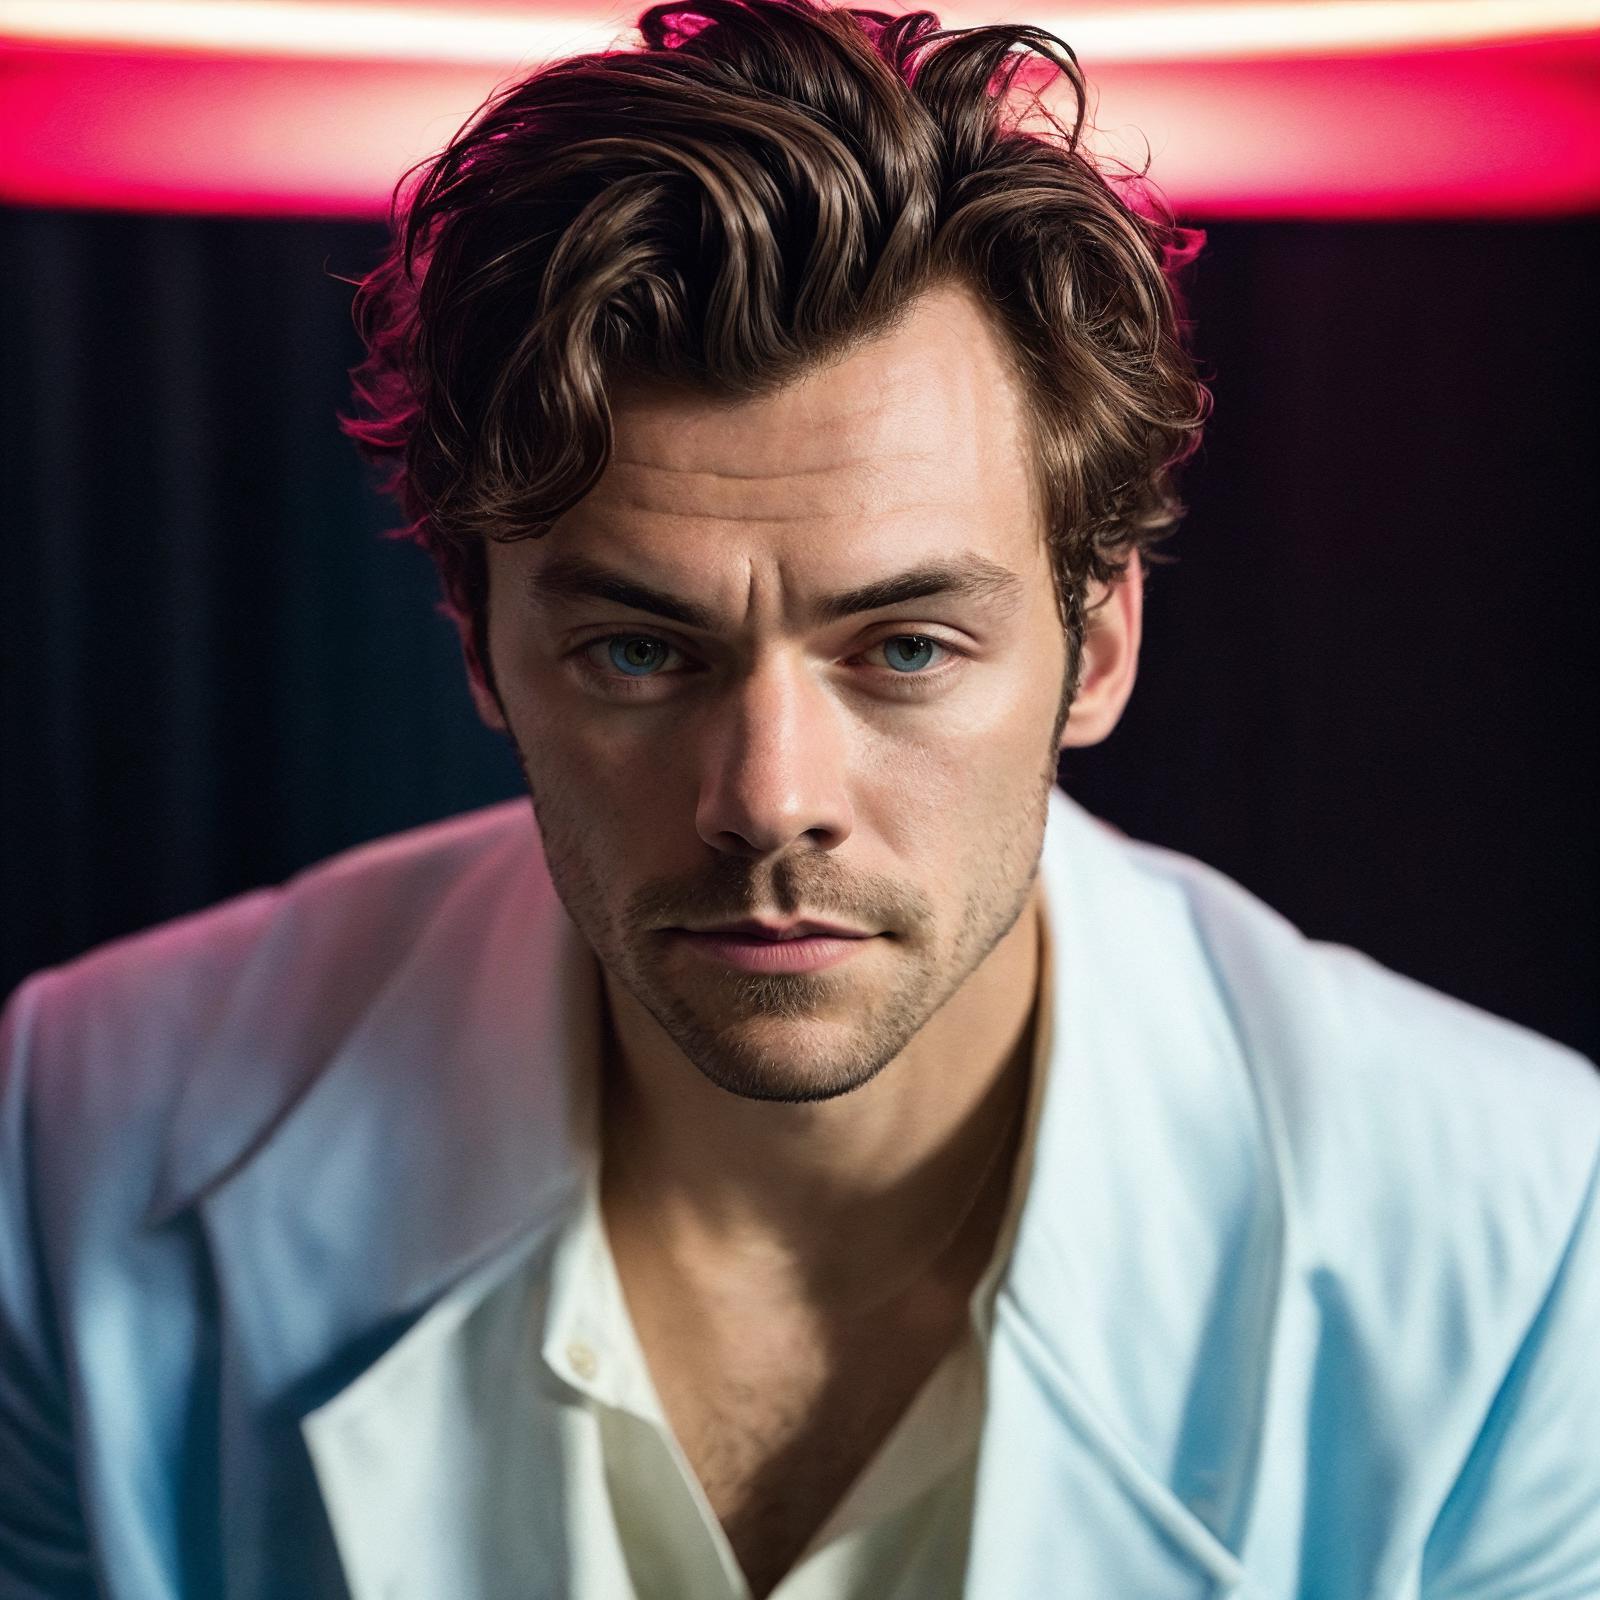 Harry Styles image by diffusiondudes